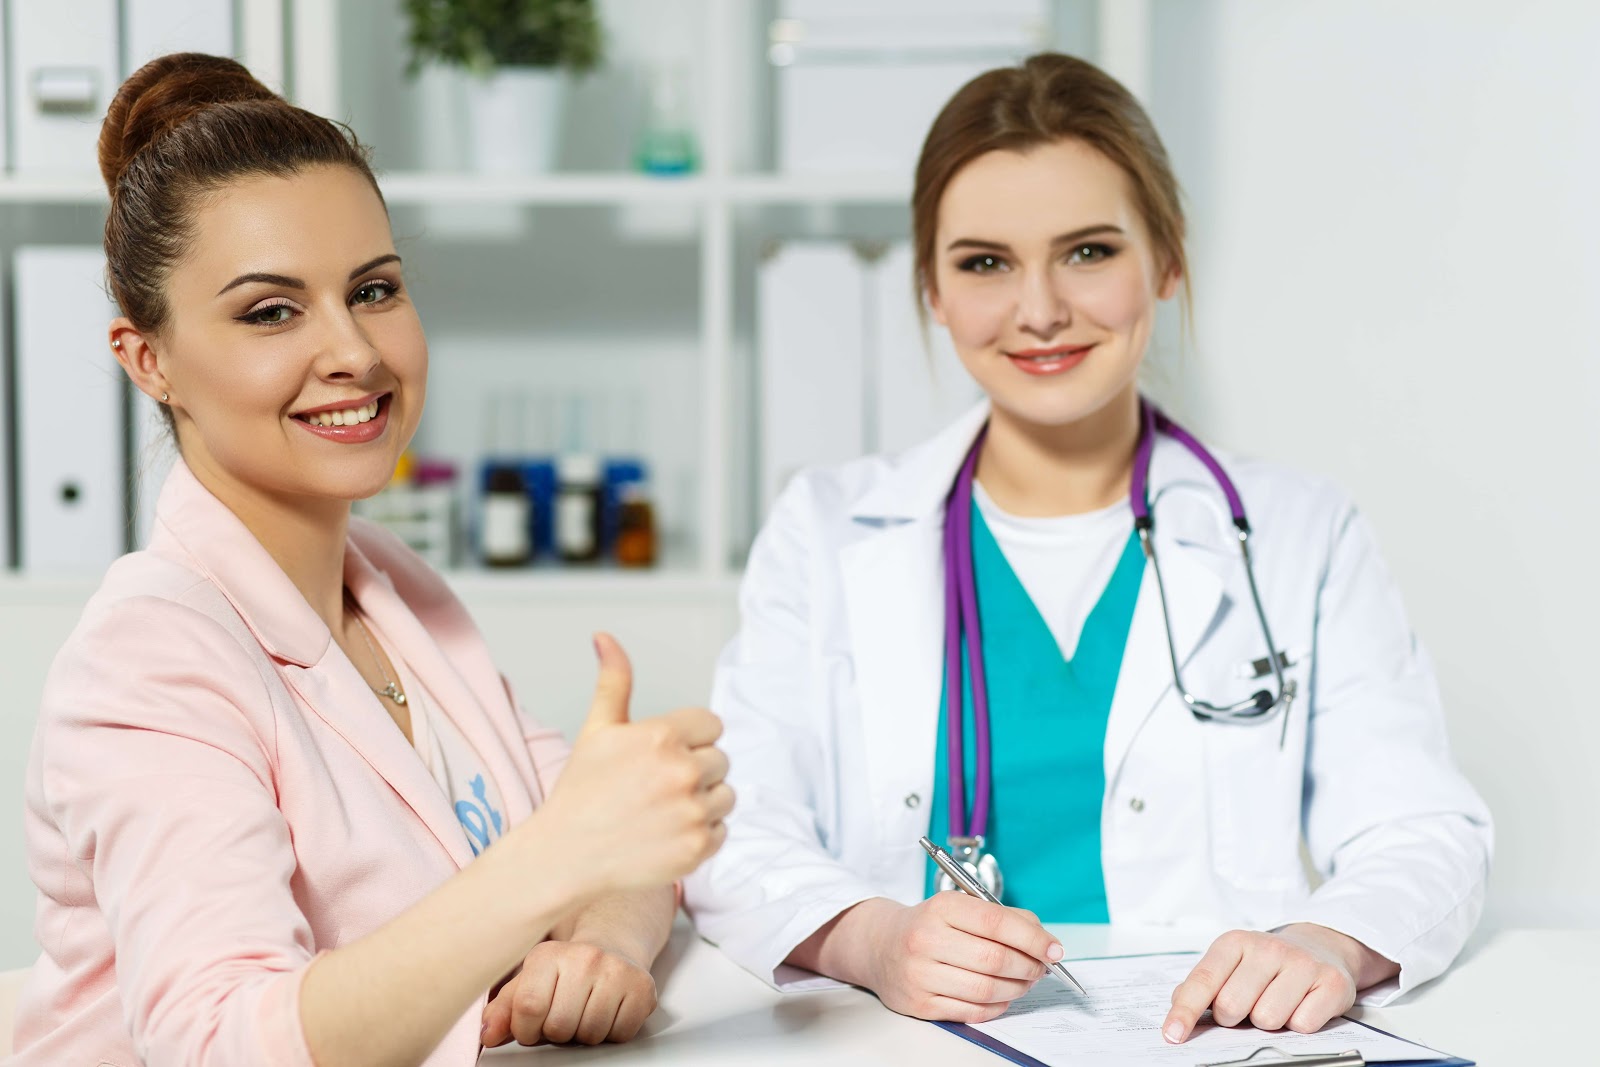 Nurses On Call: Top Nurse Staffing Agency Reviews and Ratings